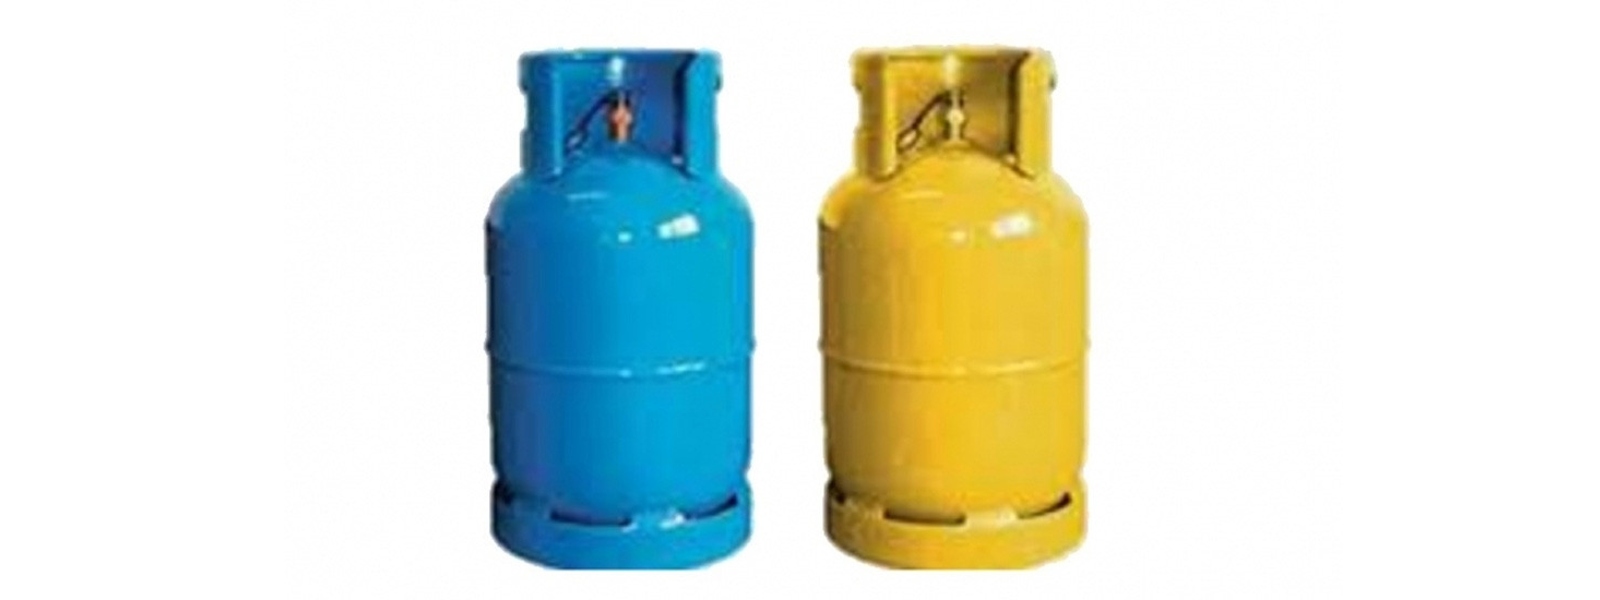 Suspected & half-used domestic gas cylinders will be collected; CAA tells CA